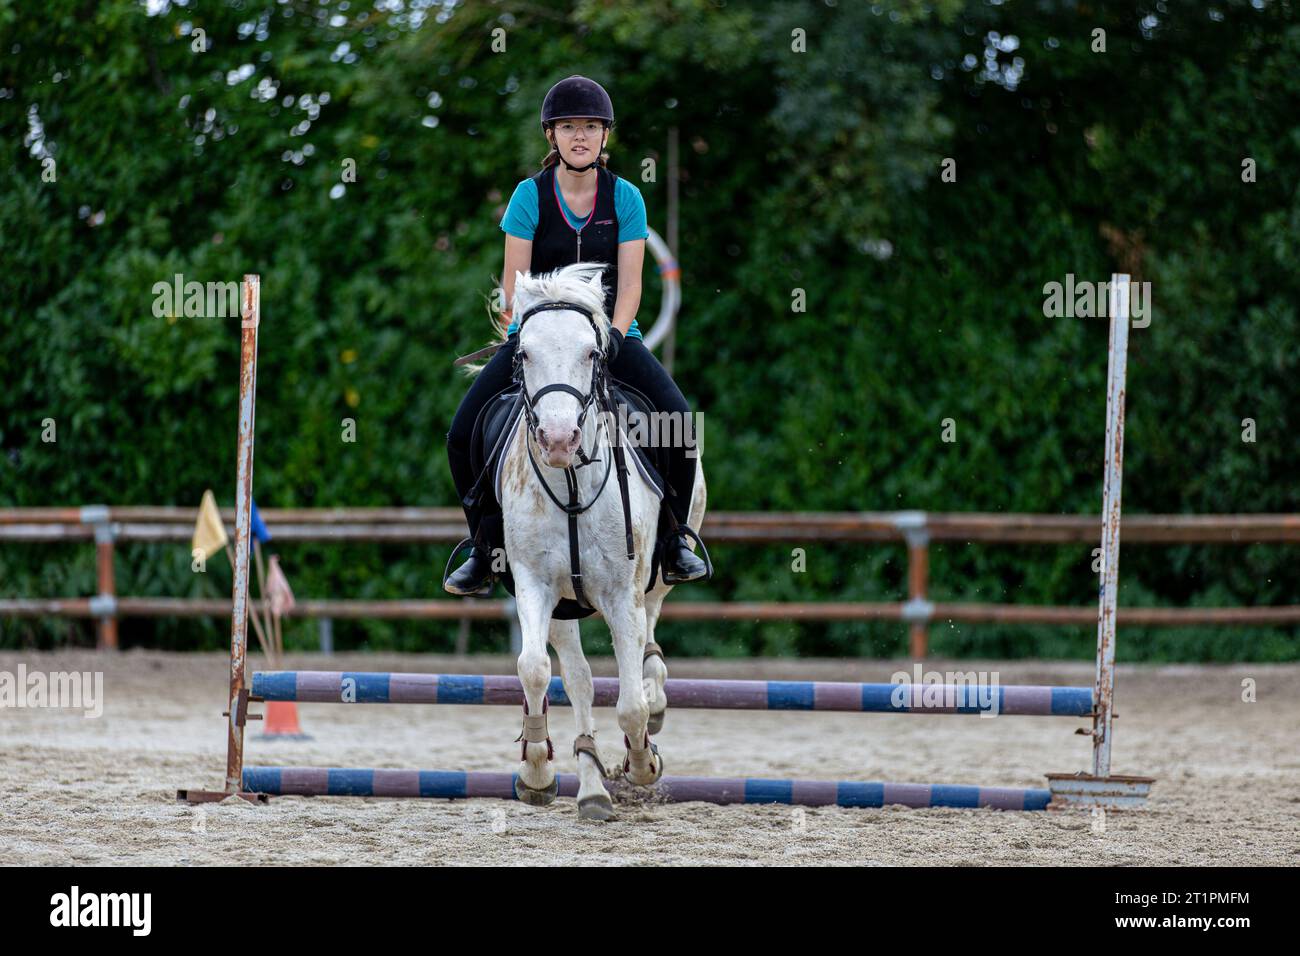 Young girl riding a white horse during training Stock Photo